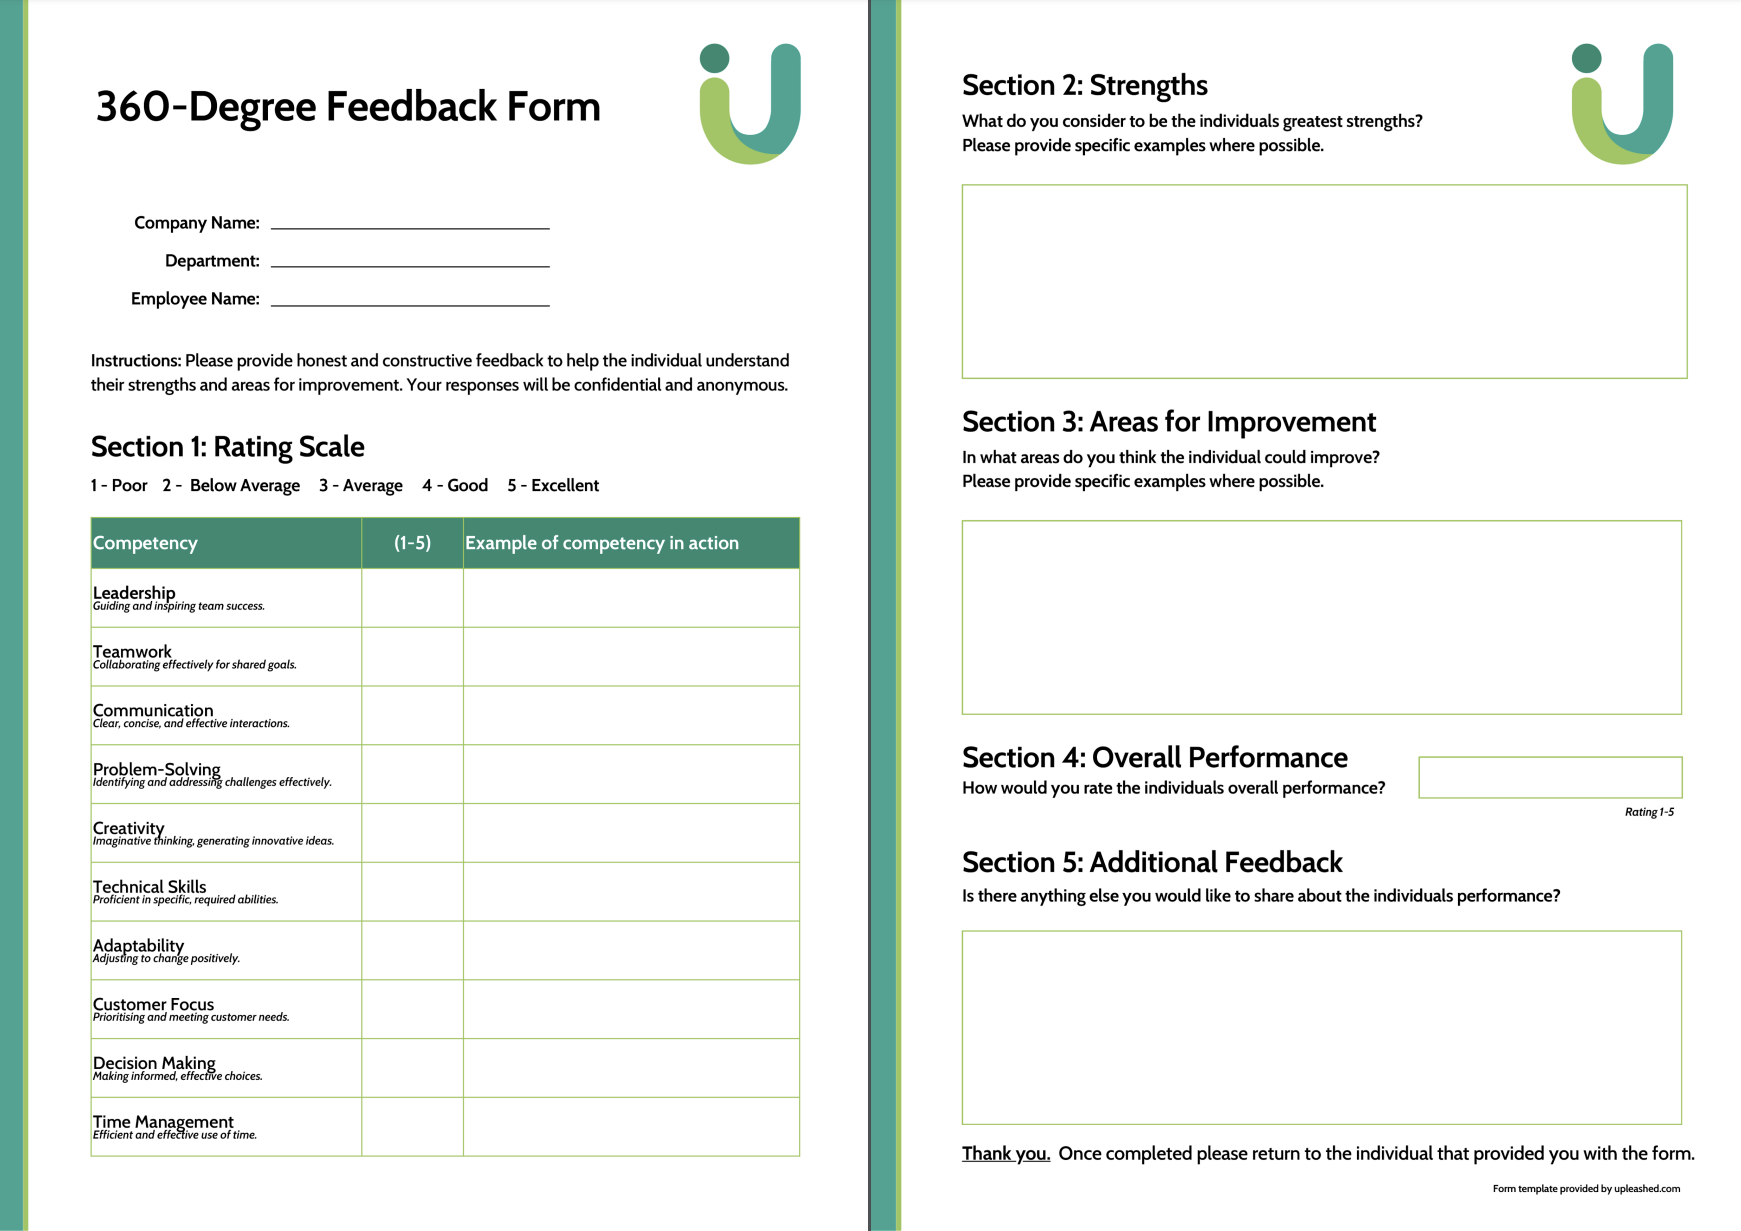 Image of the upleashed 360 degree feedback form that can be accessed for free when you become a student of upleashed